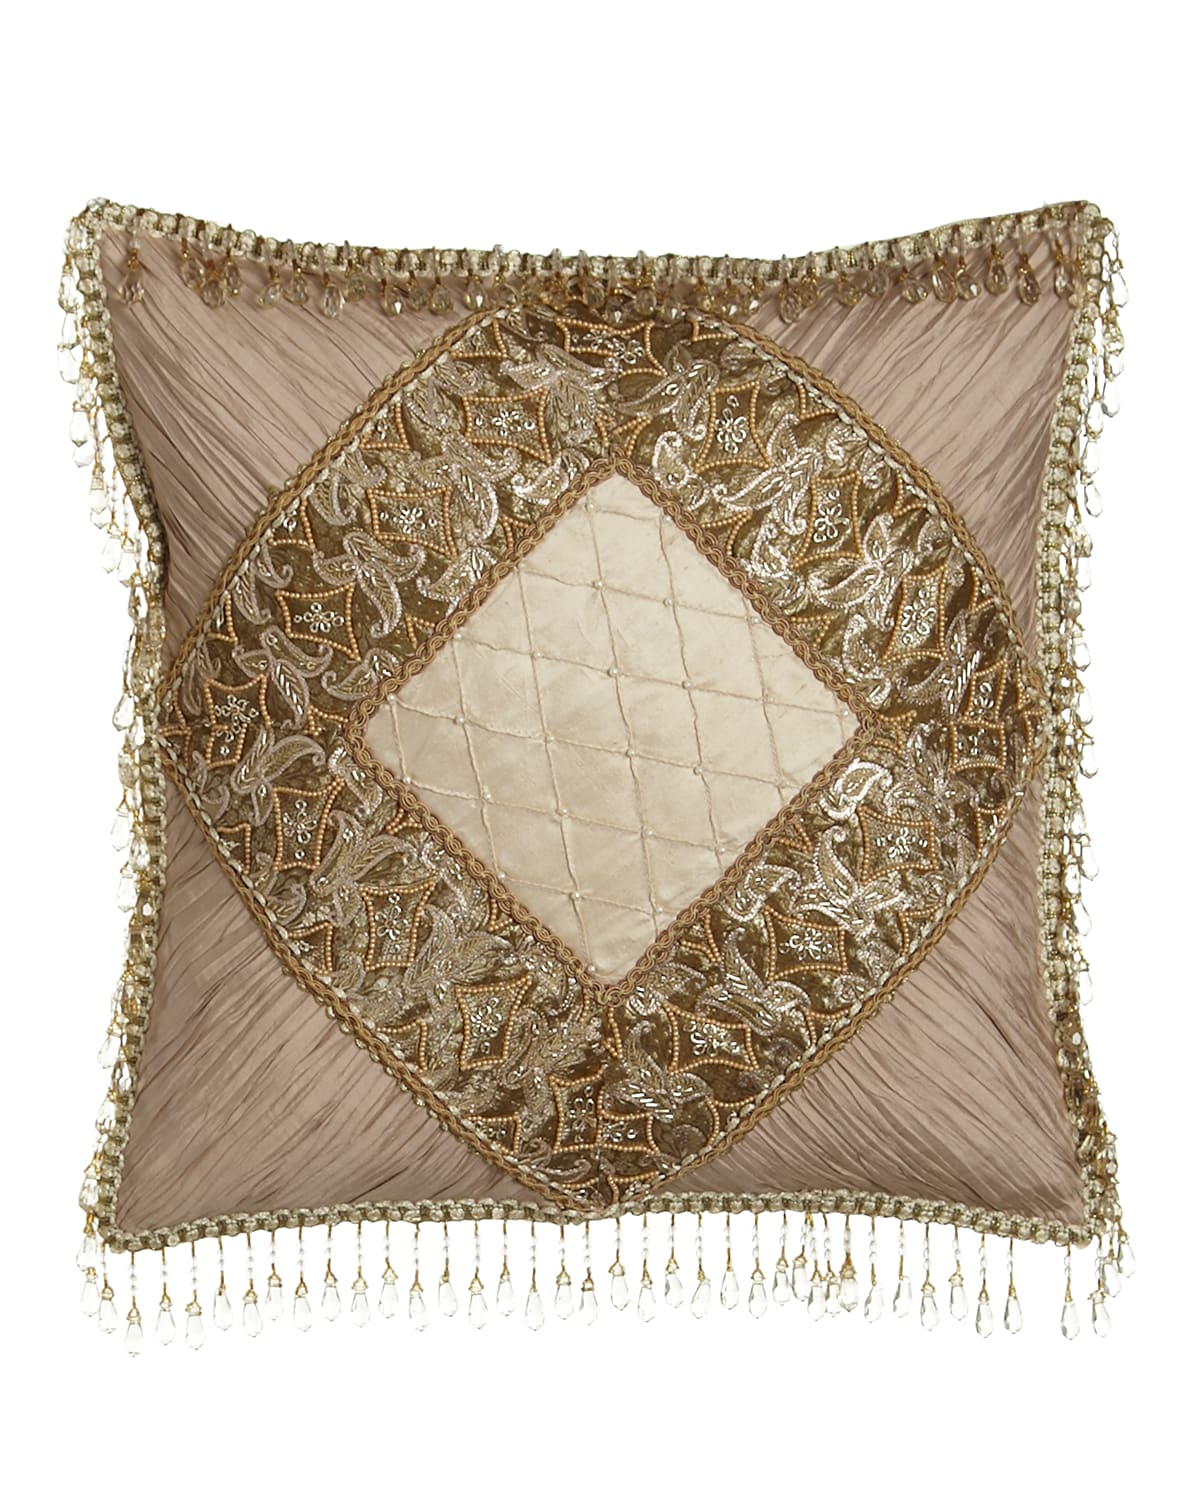 Image Sweet Dreams Alessandra Pillow with Shirred Silk Corners & Bead Embellishment, 16"Sq.